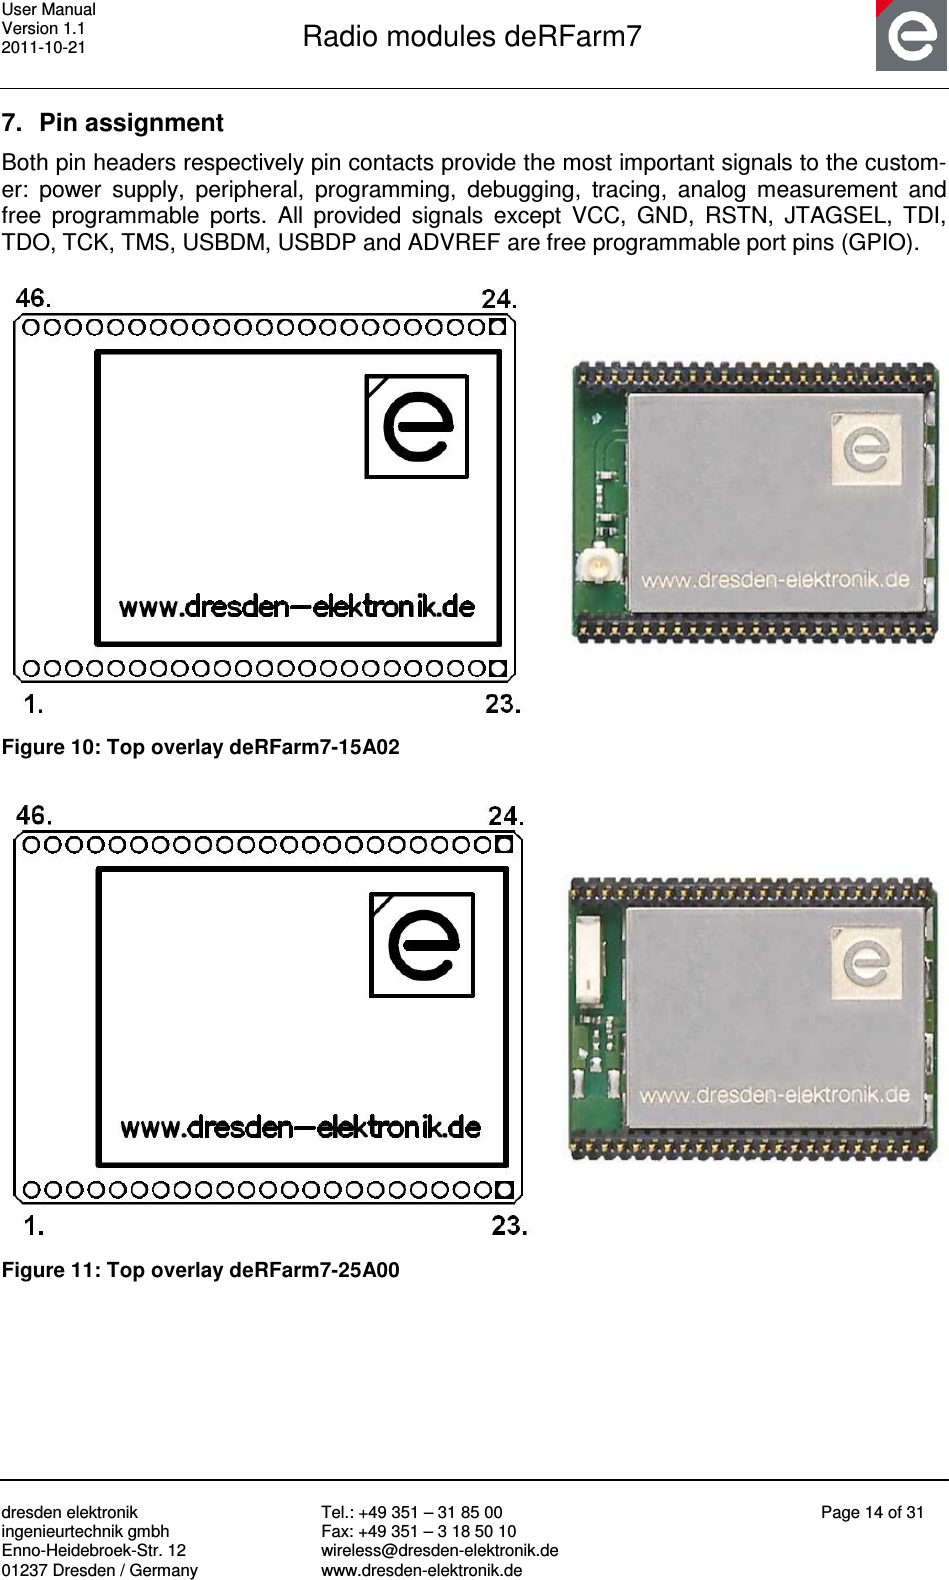 User Manual Version 1.1 2011-10-21       Radio modules deRFarm7       dresden elektronik ingenieurtechnik gmbh Enno-Heidebroek-Str. 12 01237 Dresden / Germany Tel.: +49 351 – 31 85 00 Fax: +49 351 – 3 18 50 10 wireless@dresden-elektronik.de www.dresden-elektronik.de Page 14 of 31  7.  Pin assignment Both pin headers respectively pin contacts provide the most important signals to the custom-er:  power  supply,  peripheral,  programming,  debugging,  tracing,  analog  measurement  and free  programmable  ports.  All  provided  signals  except  VCC,  GND,  RSTN,  JTAGSEL,  TDI, TDO, TCK, TMS, USBDM, USBDP and ADVREF are free programmable port pins (GPIO).     Figure 10: Top overlay deRFarm7-15A02    Figure 11: Top overlay deRFarm7-25A00  